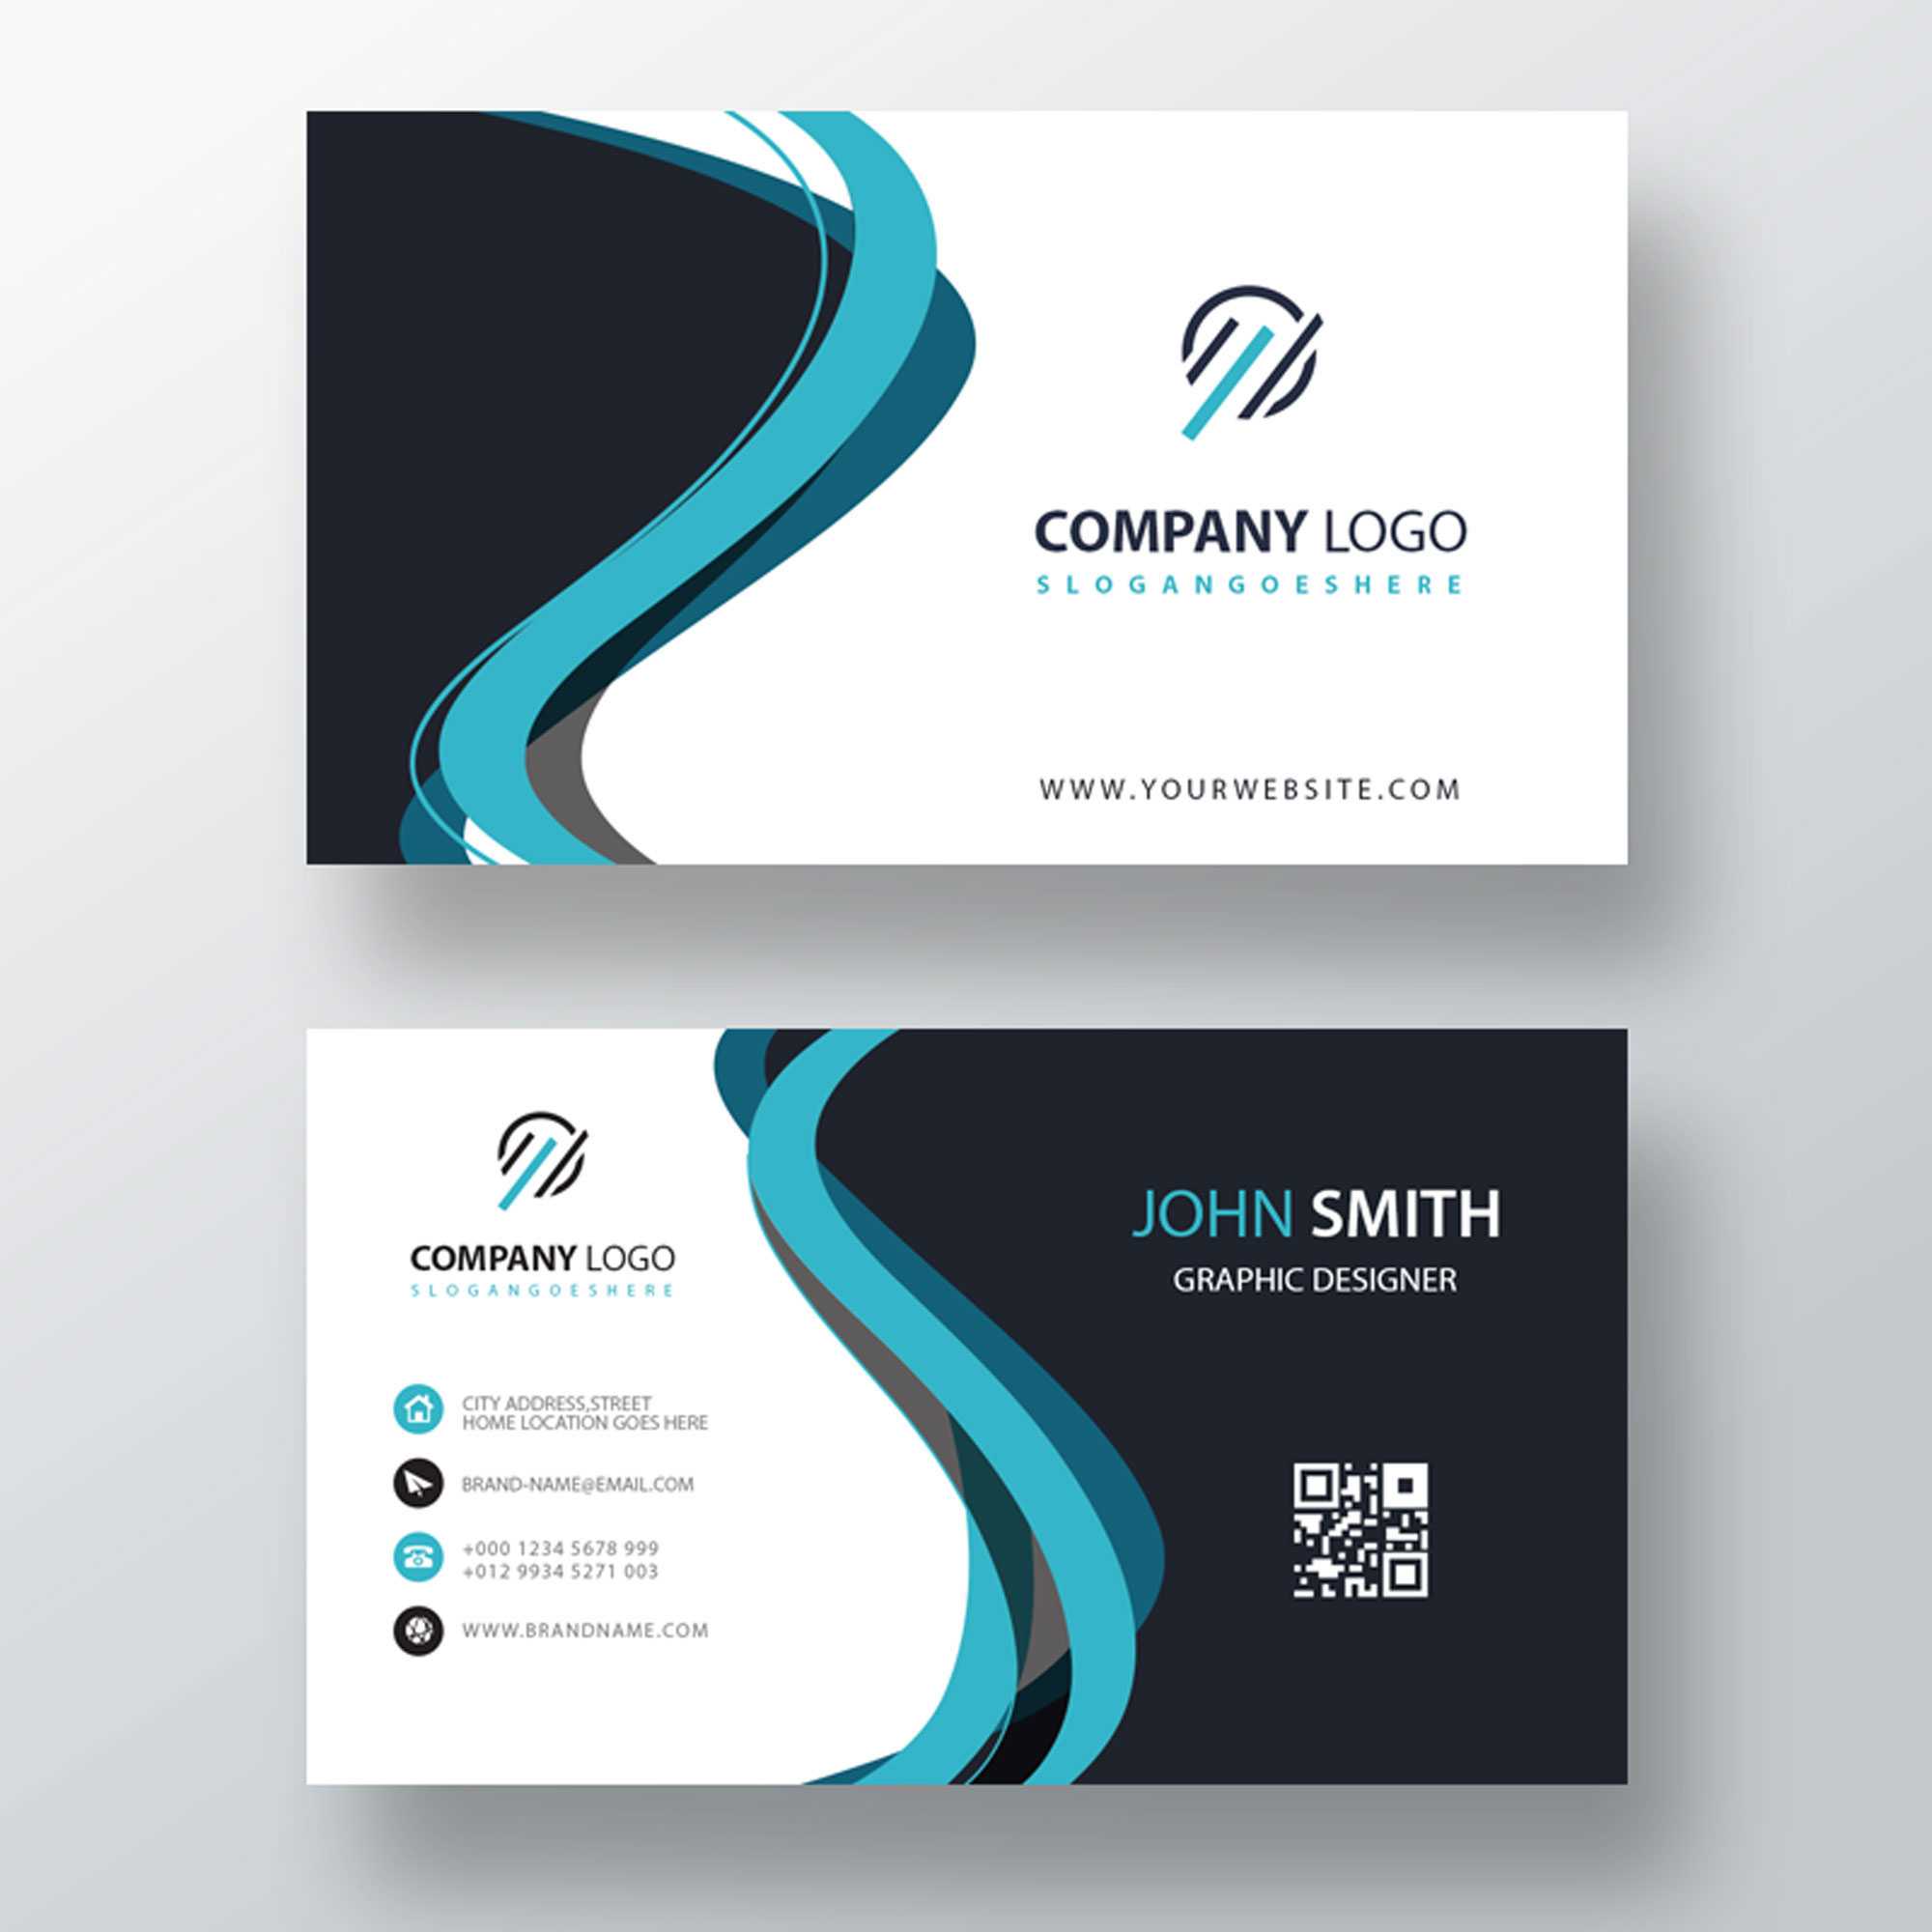 Classic Company Visiting Card Template | Free Customize Pertaining To Designer Visiting Cards Templates